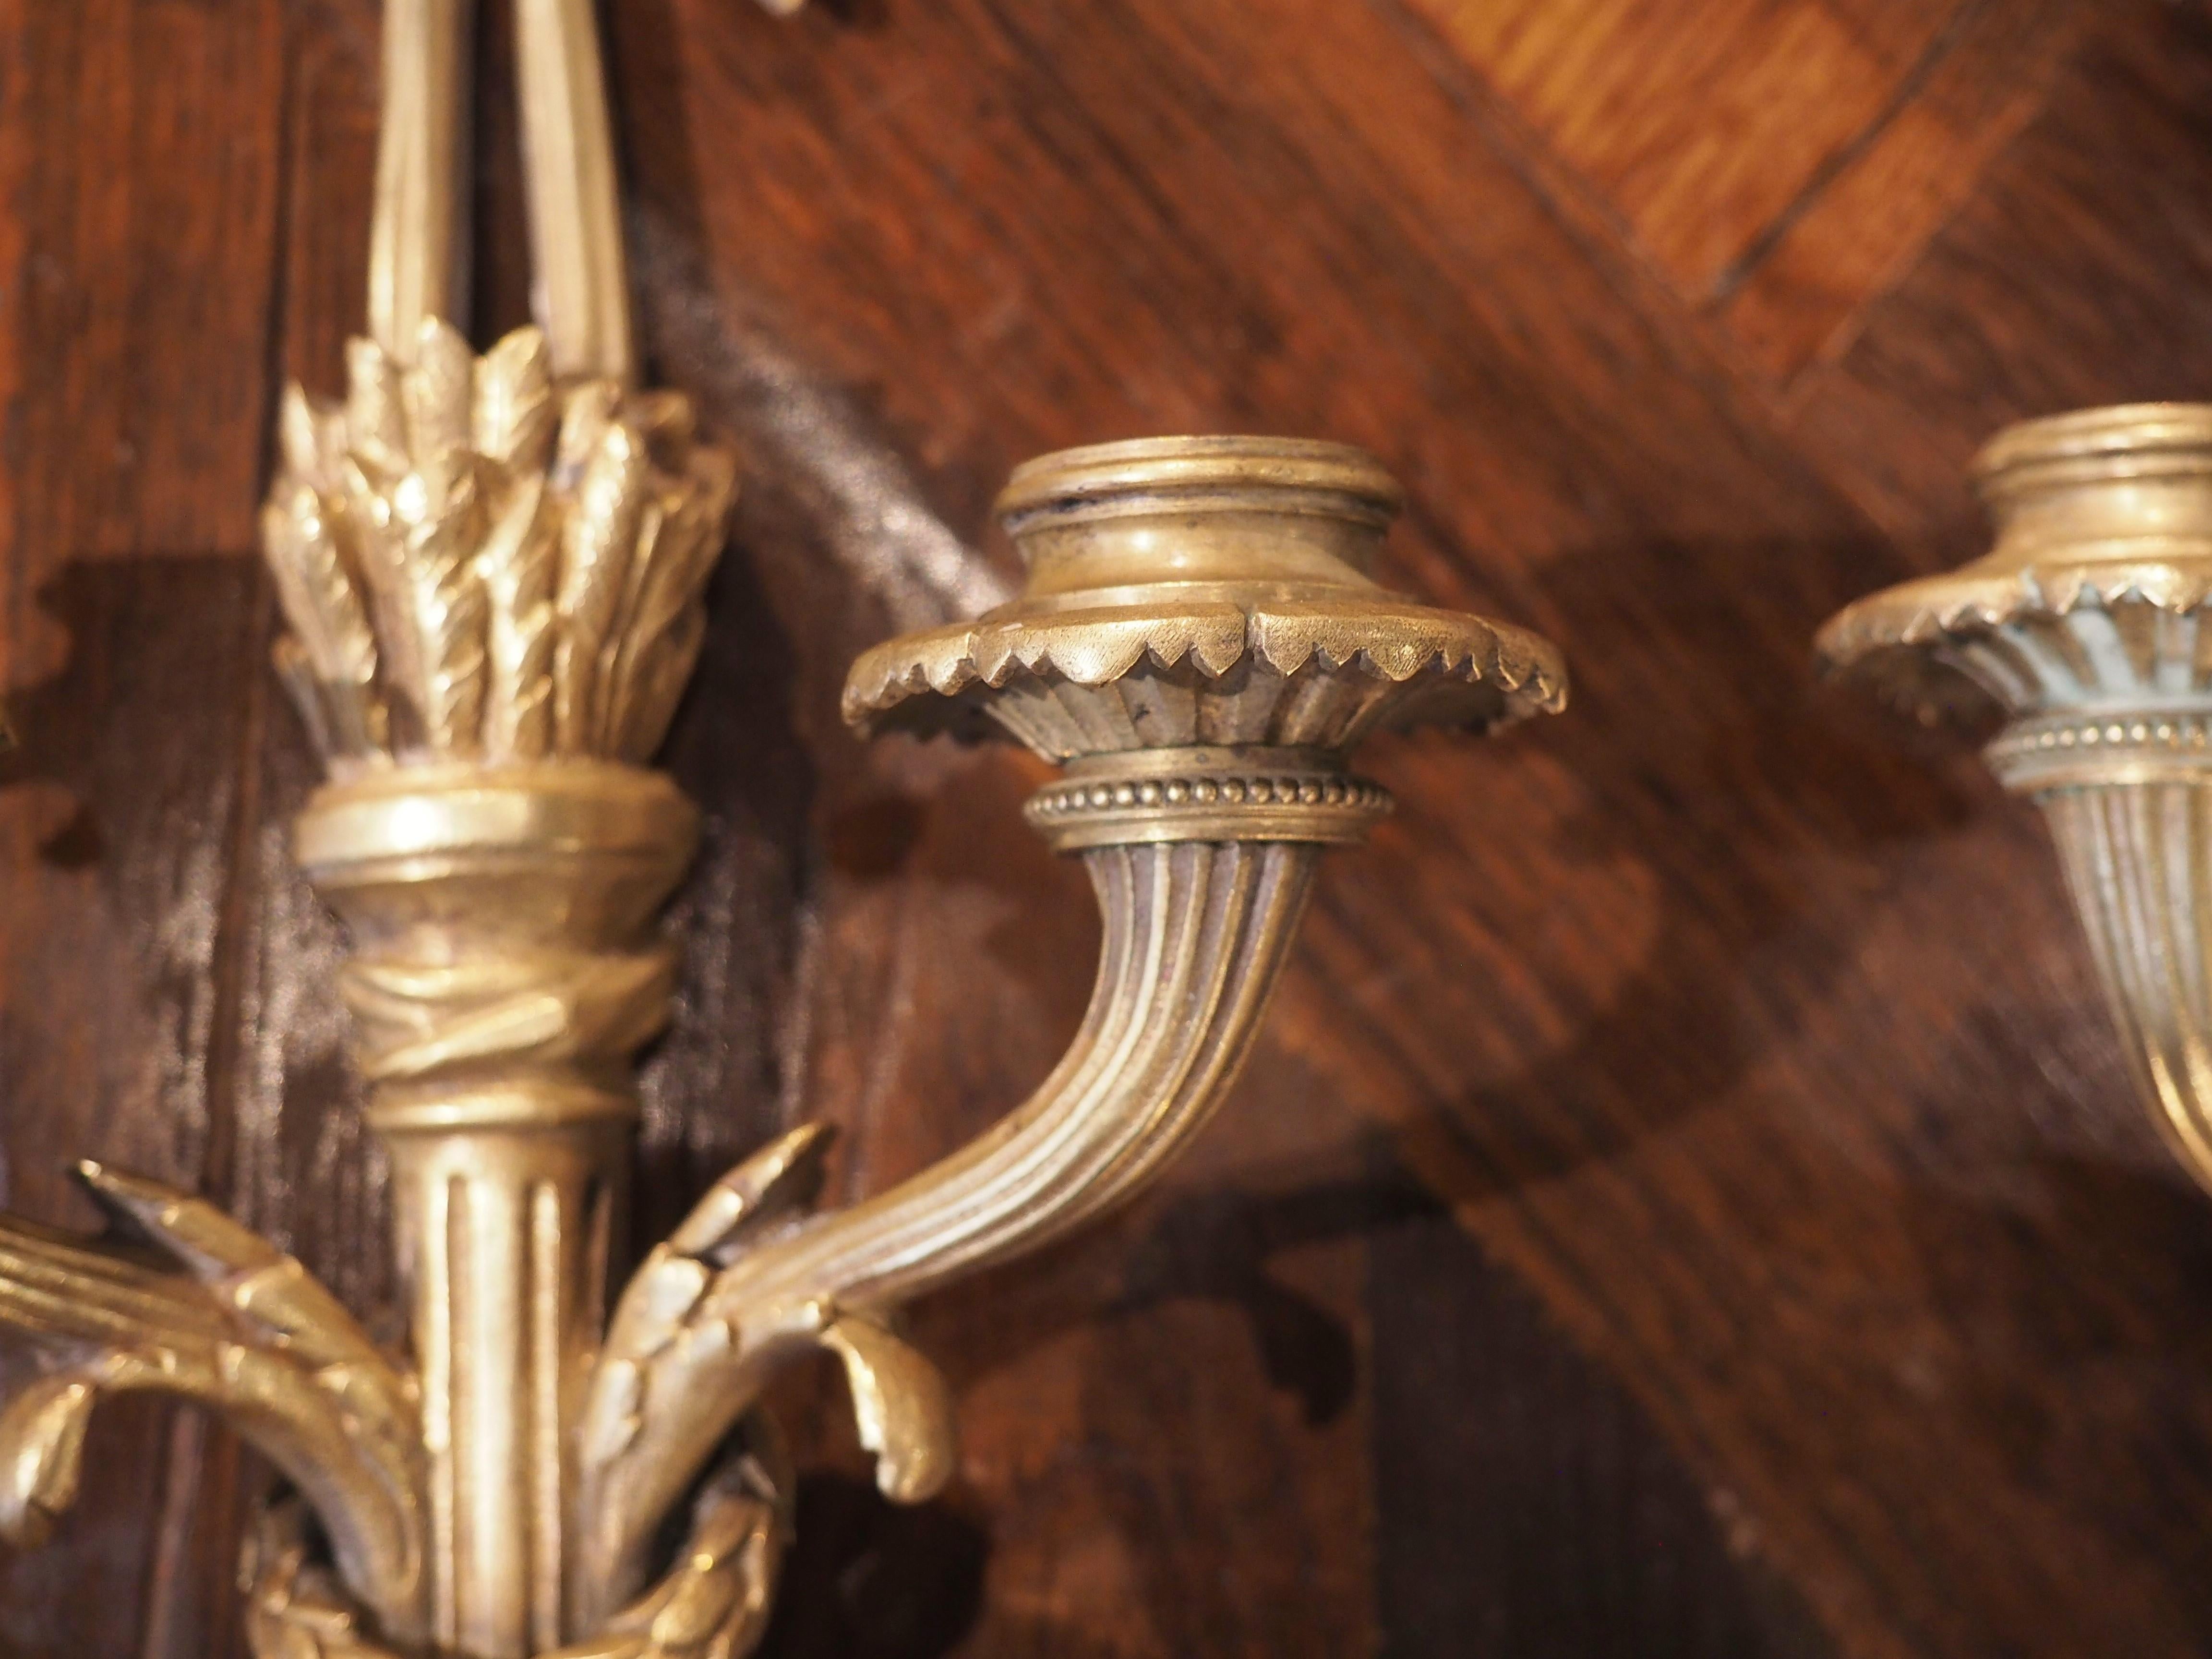 Neoclassical motifs were an important part of the Louis XVI period, reflecting the rediscovery of the lost ancient Roman cities, Herculaneum and Pompeii, in the middle 18th century. Our pair of bronze dore sconces from France were cast in the style